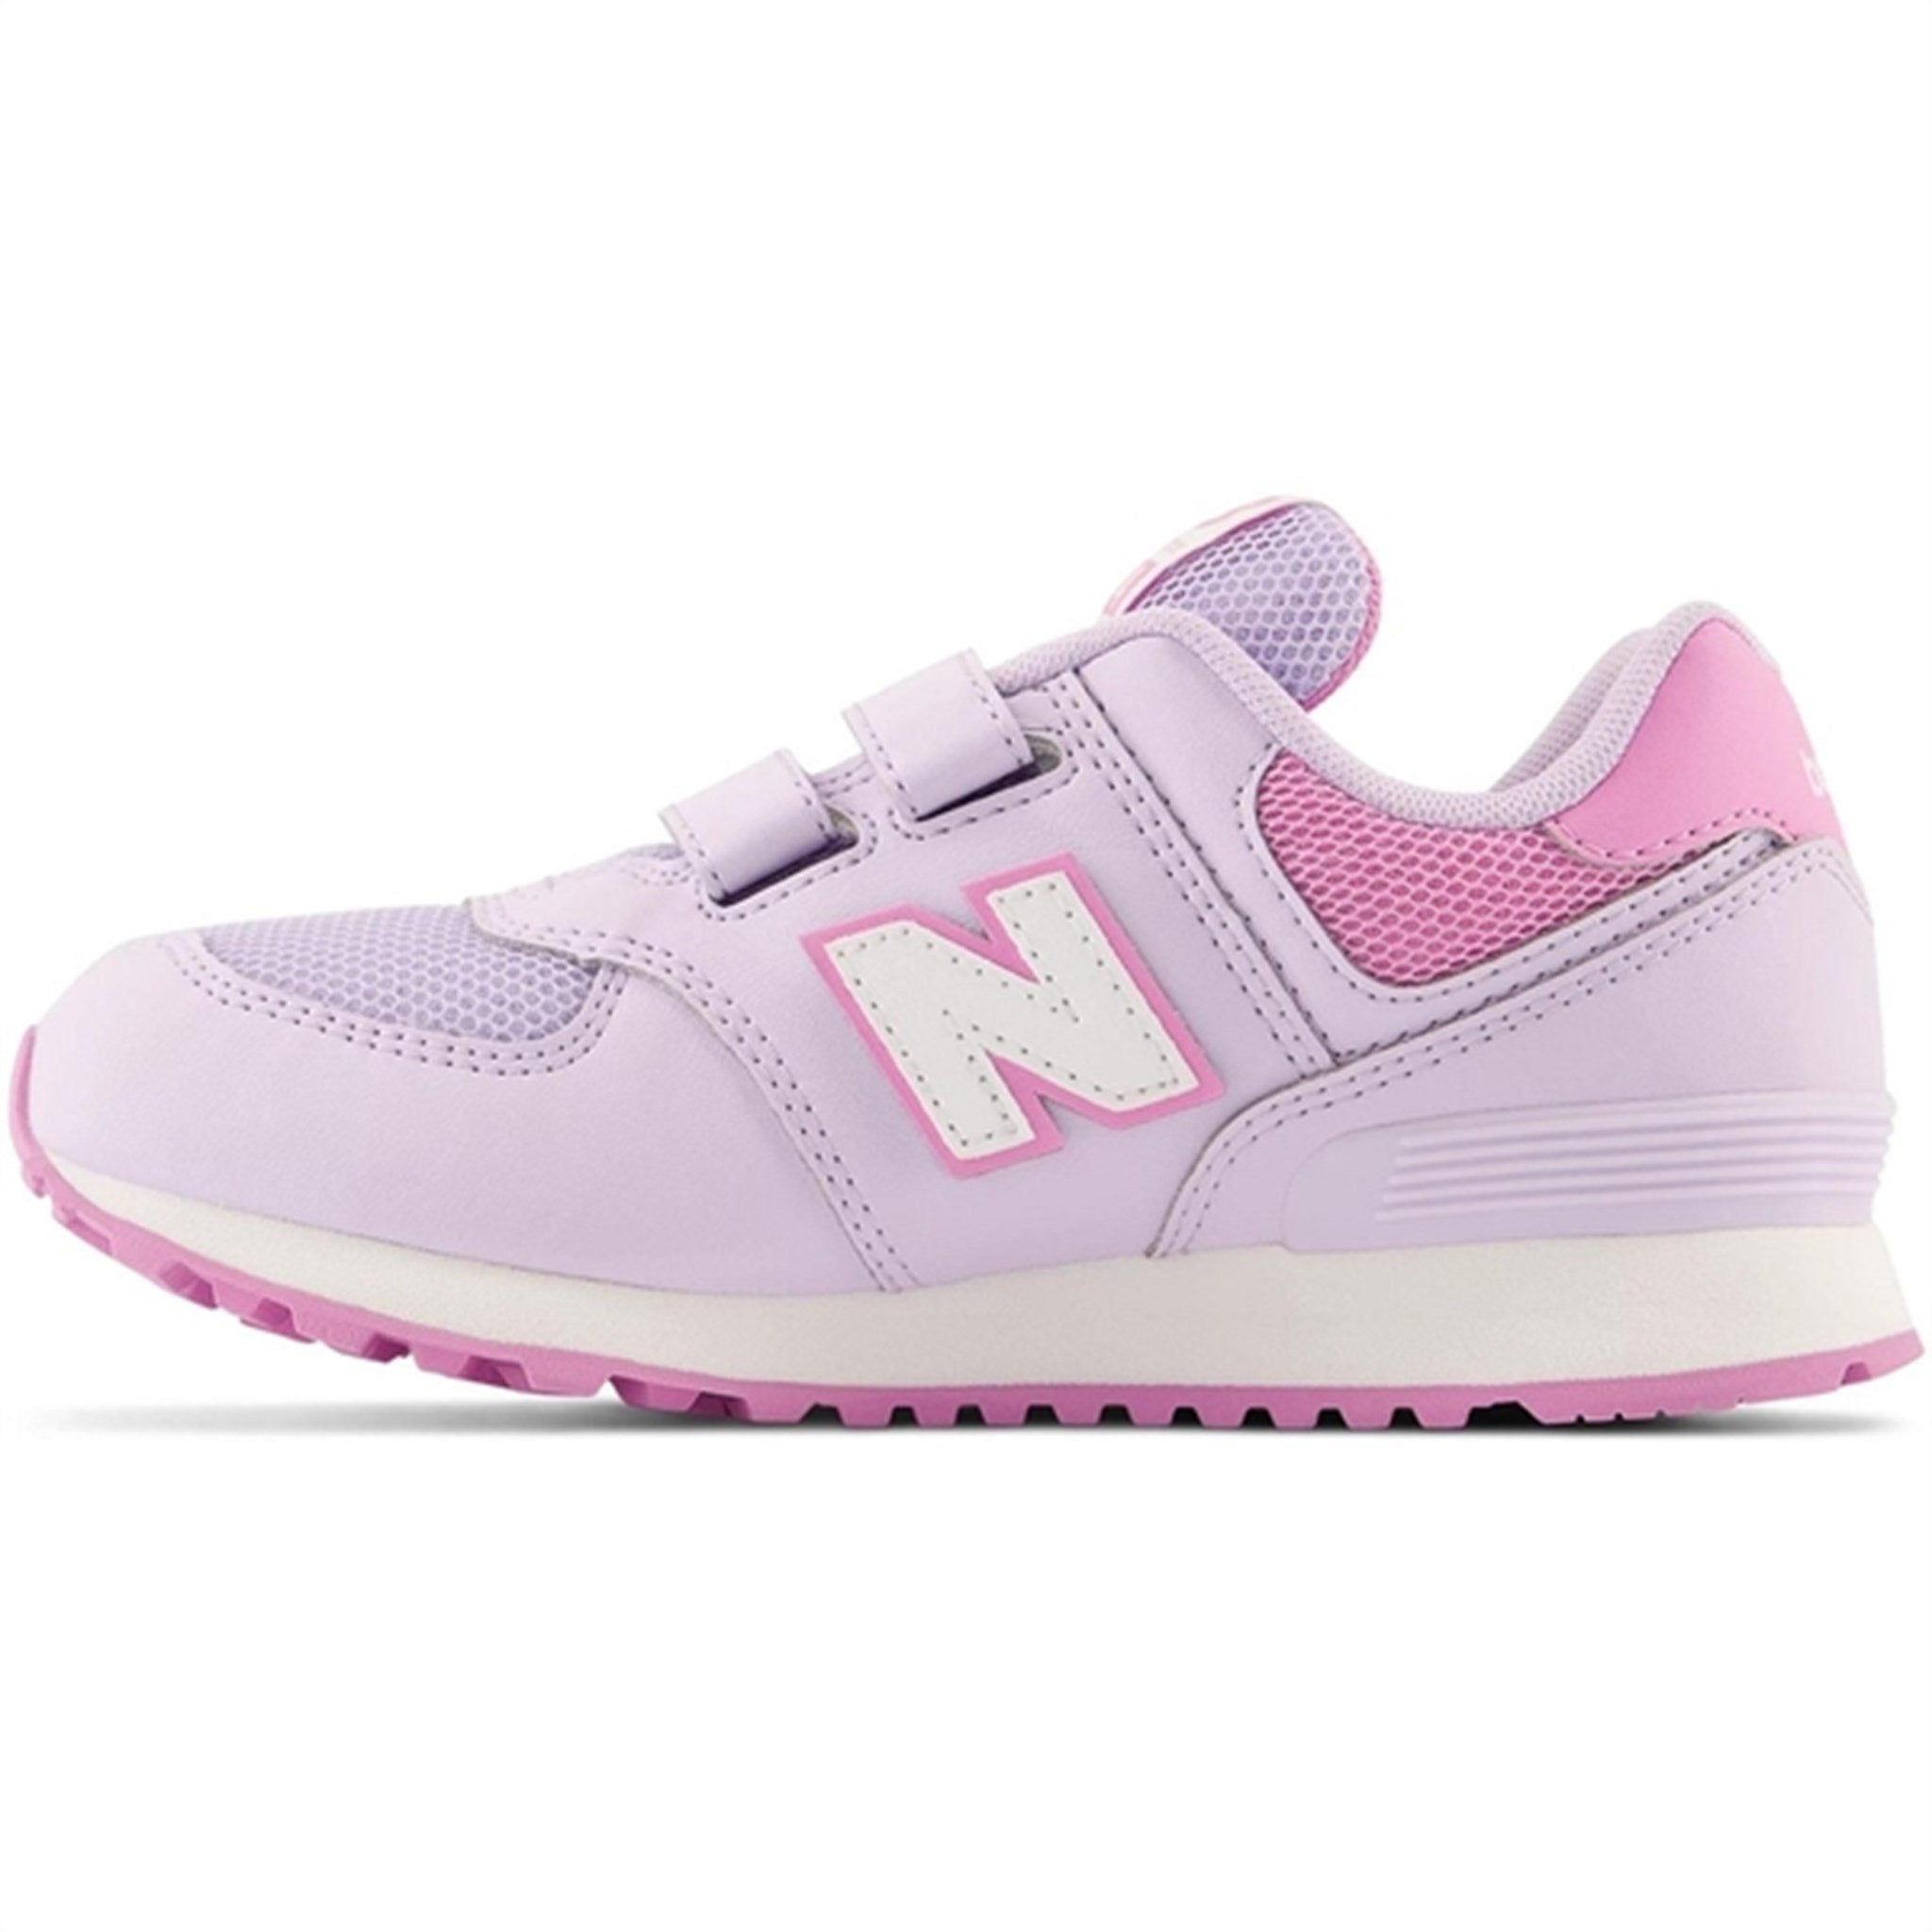 New Balance 574 Bright Lavender Sneakers 4